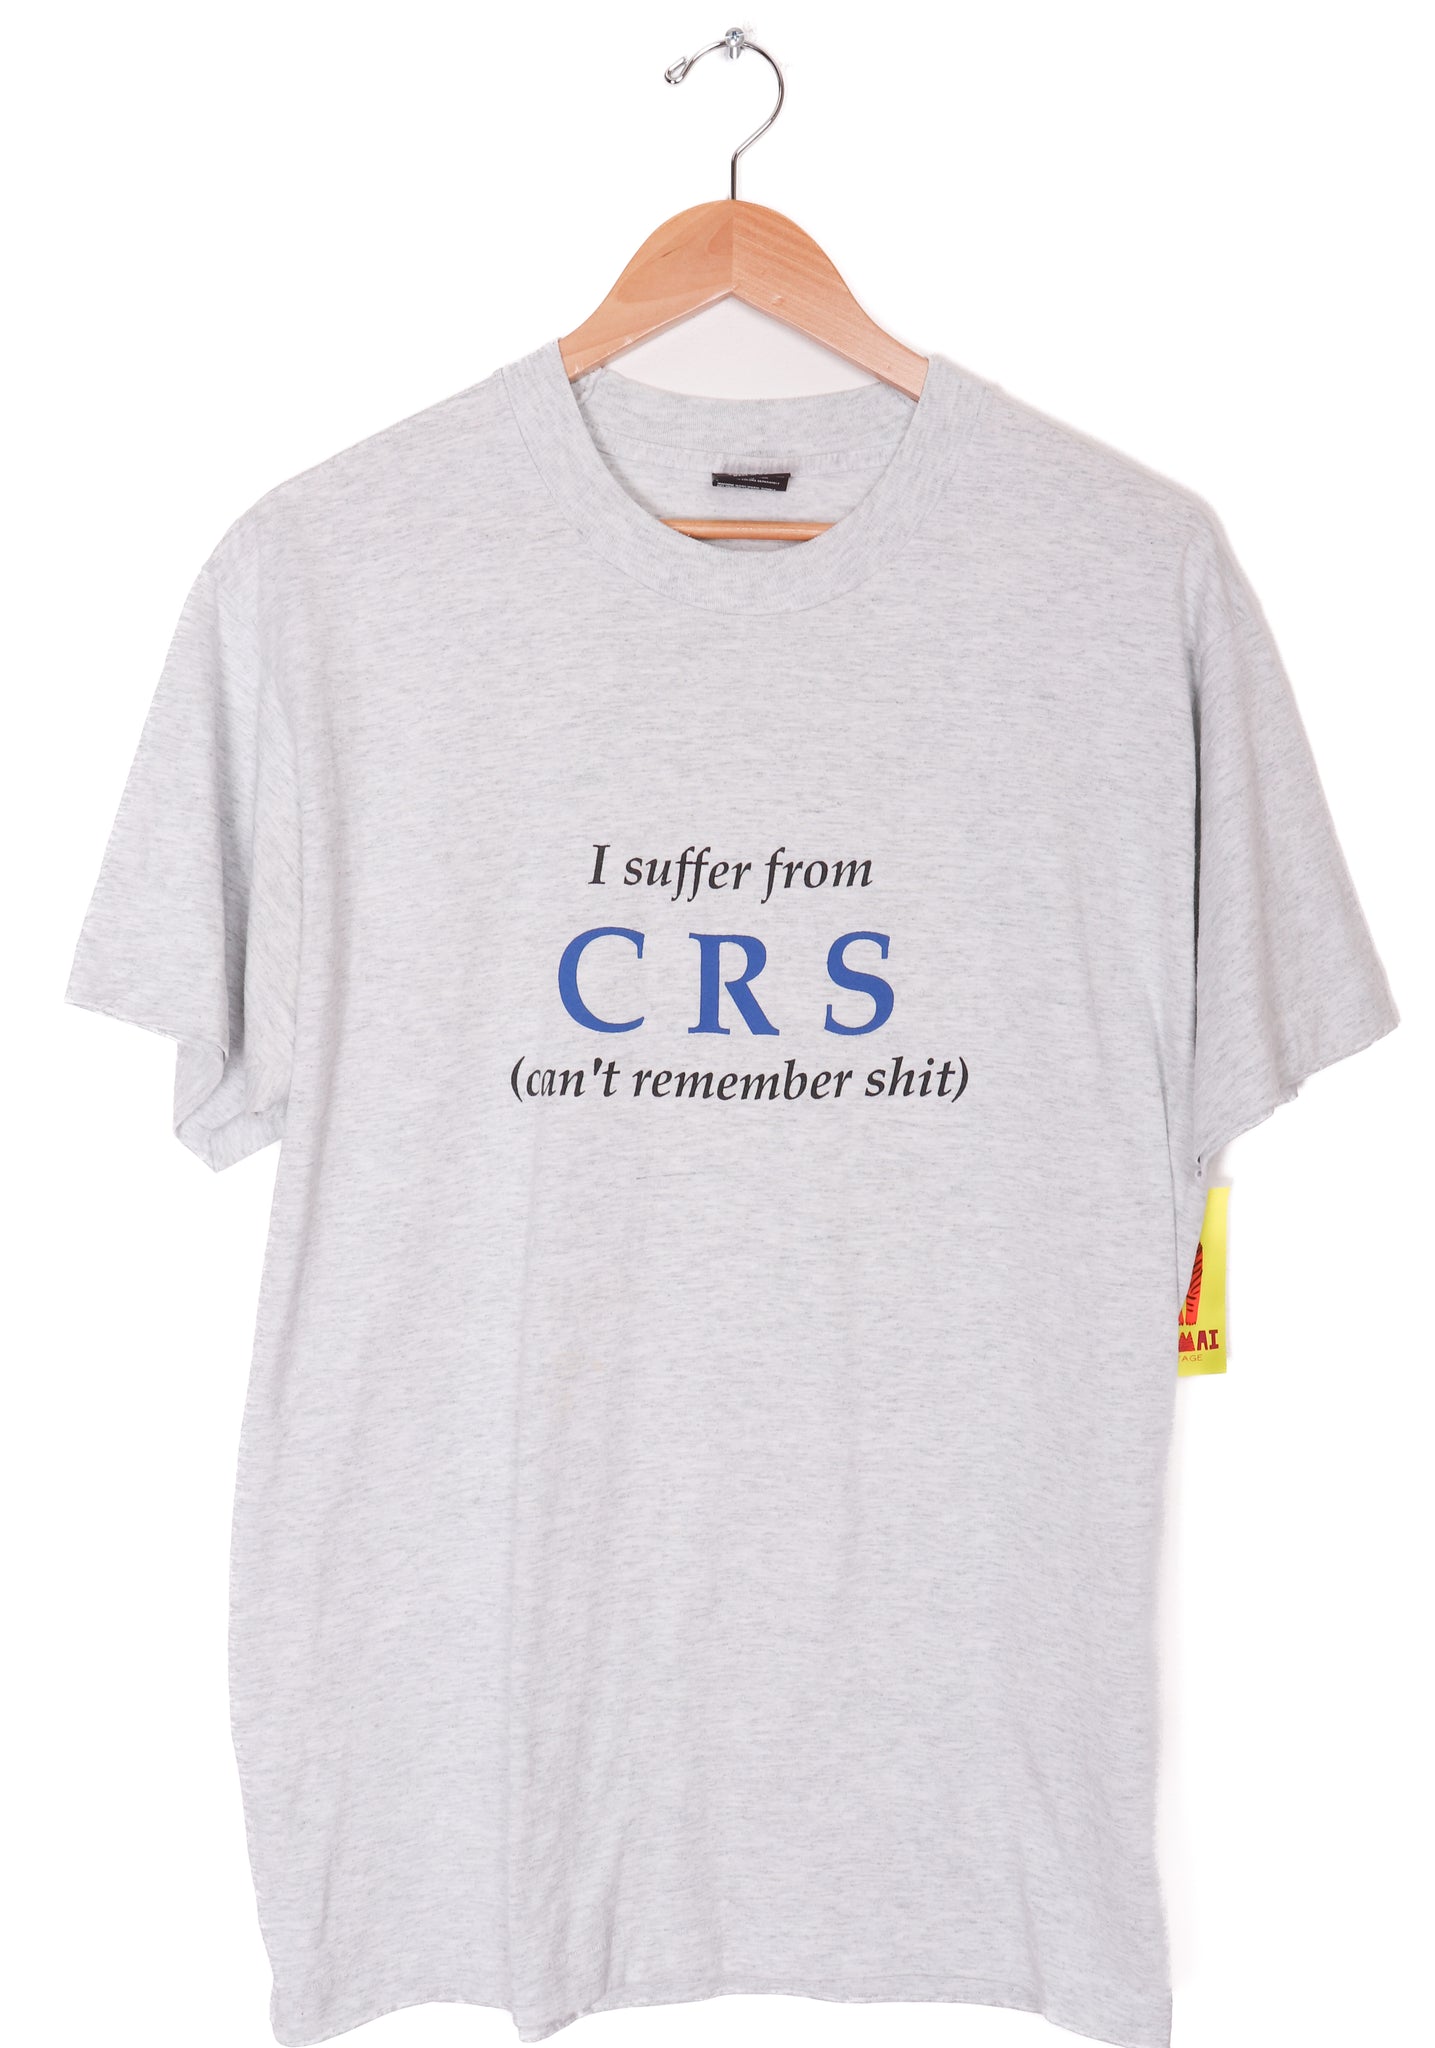 Early 90s Best Fruit of the Loom "I Suffer from CRS" T-Shirt